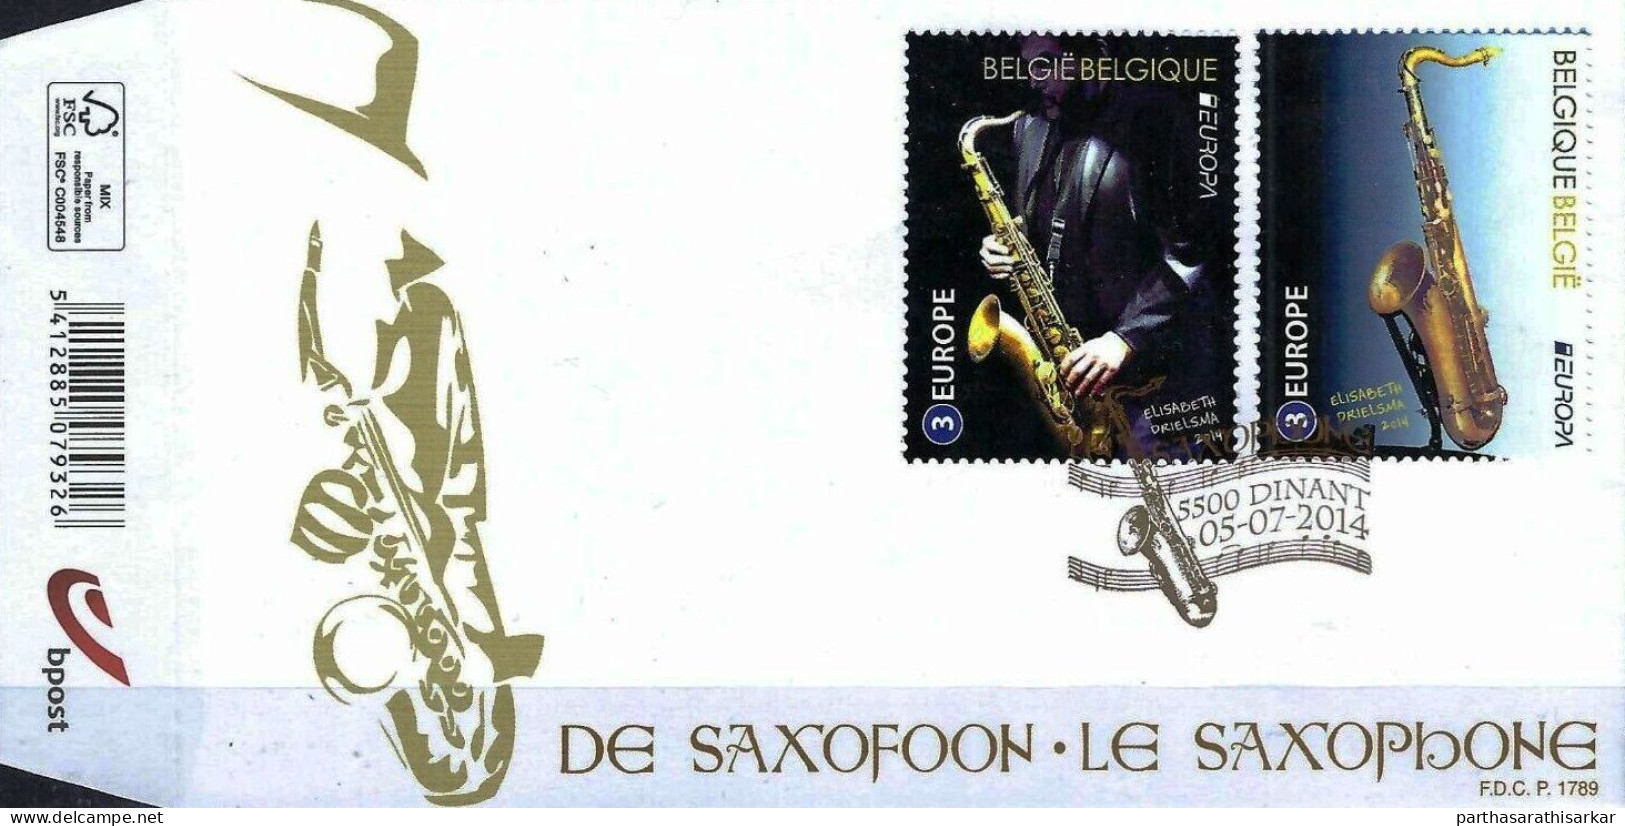 BELGIUM 2014 EUROPA CEPT MUSICAL INSTRUMENTS UNUSUAL STAMPS FDC RARE (HIGH FACE 15.8 EURO) - Lettres & Documents